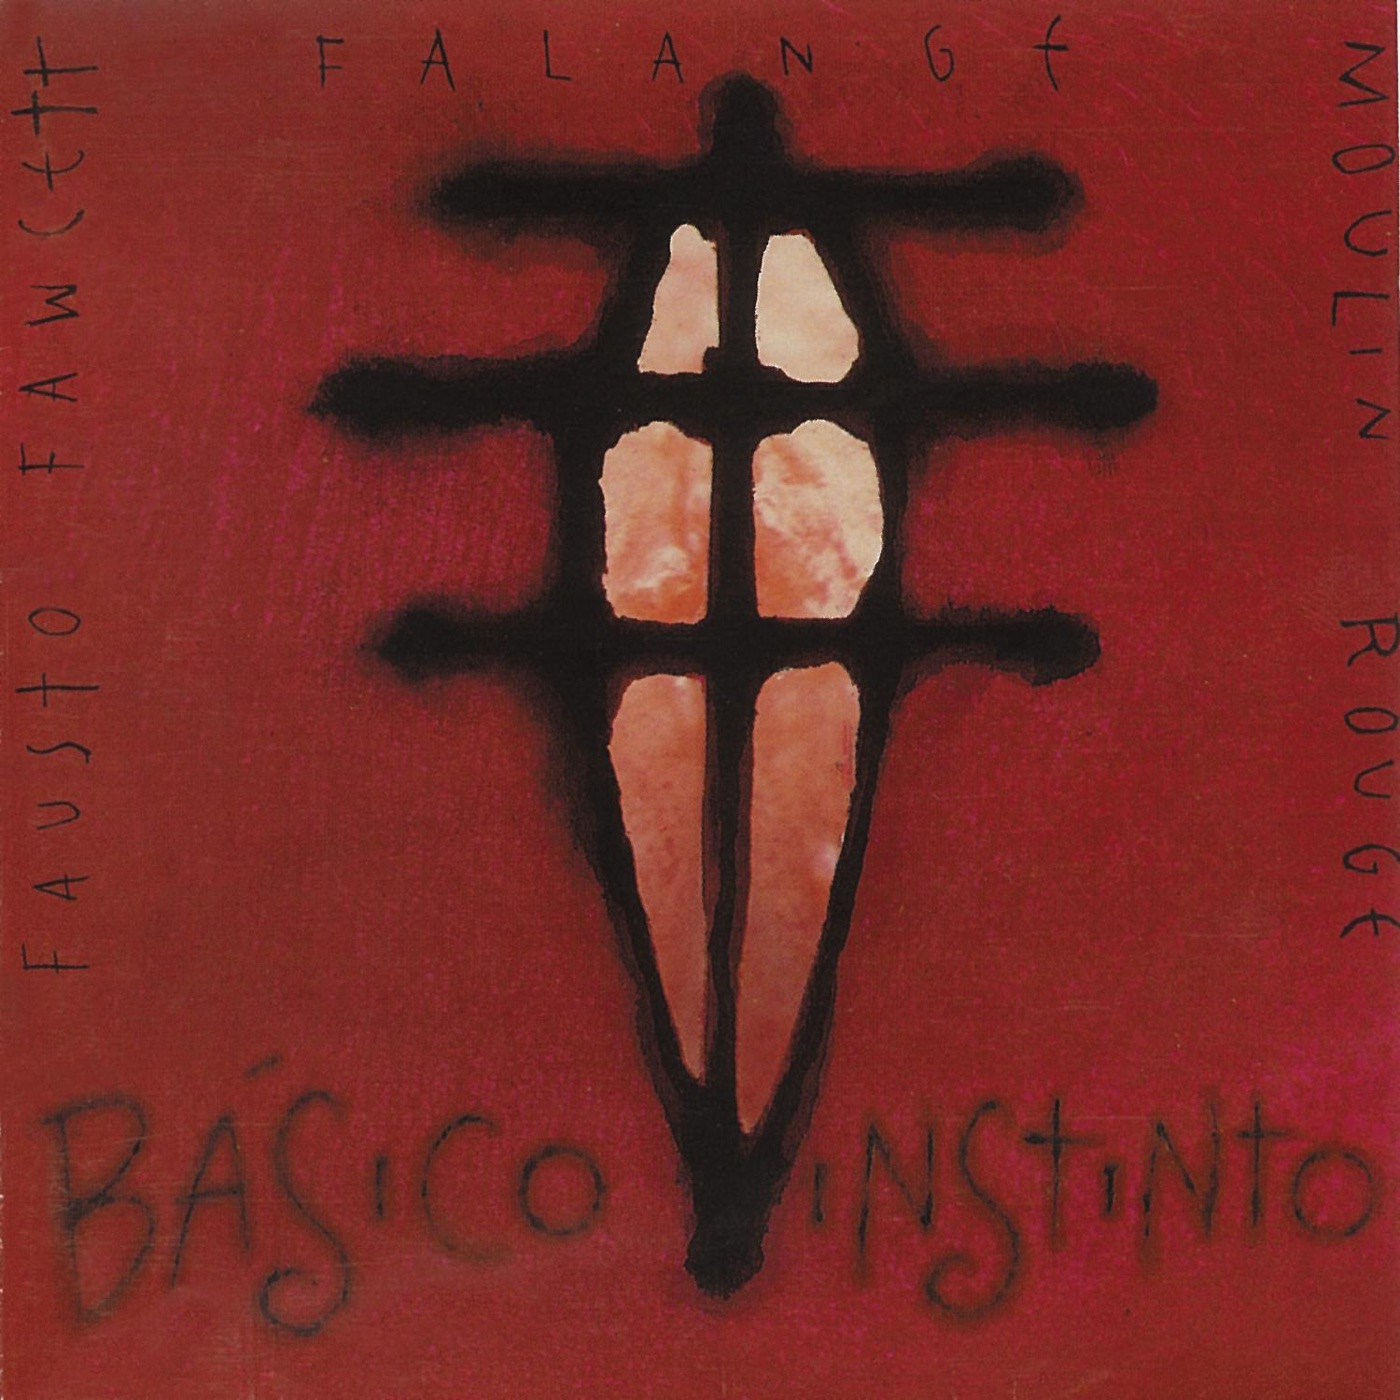 Básico Instinto by Fausto Fawcett, Falange Moulin Rouge